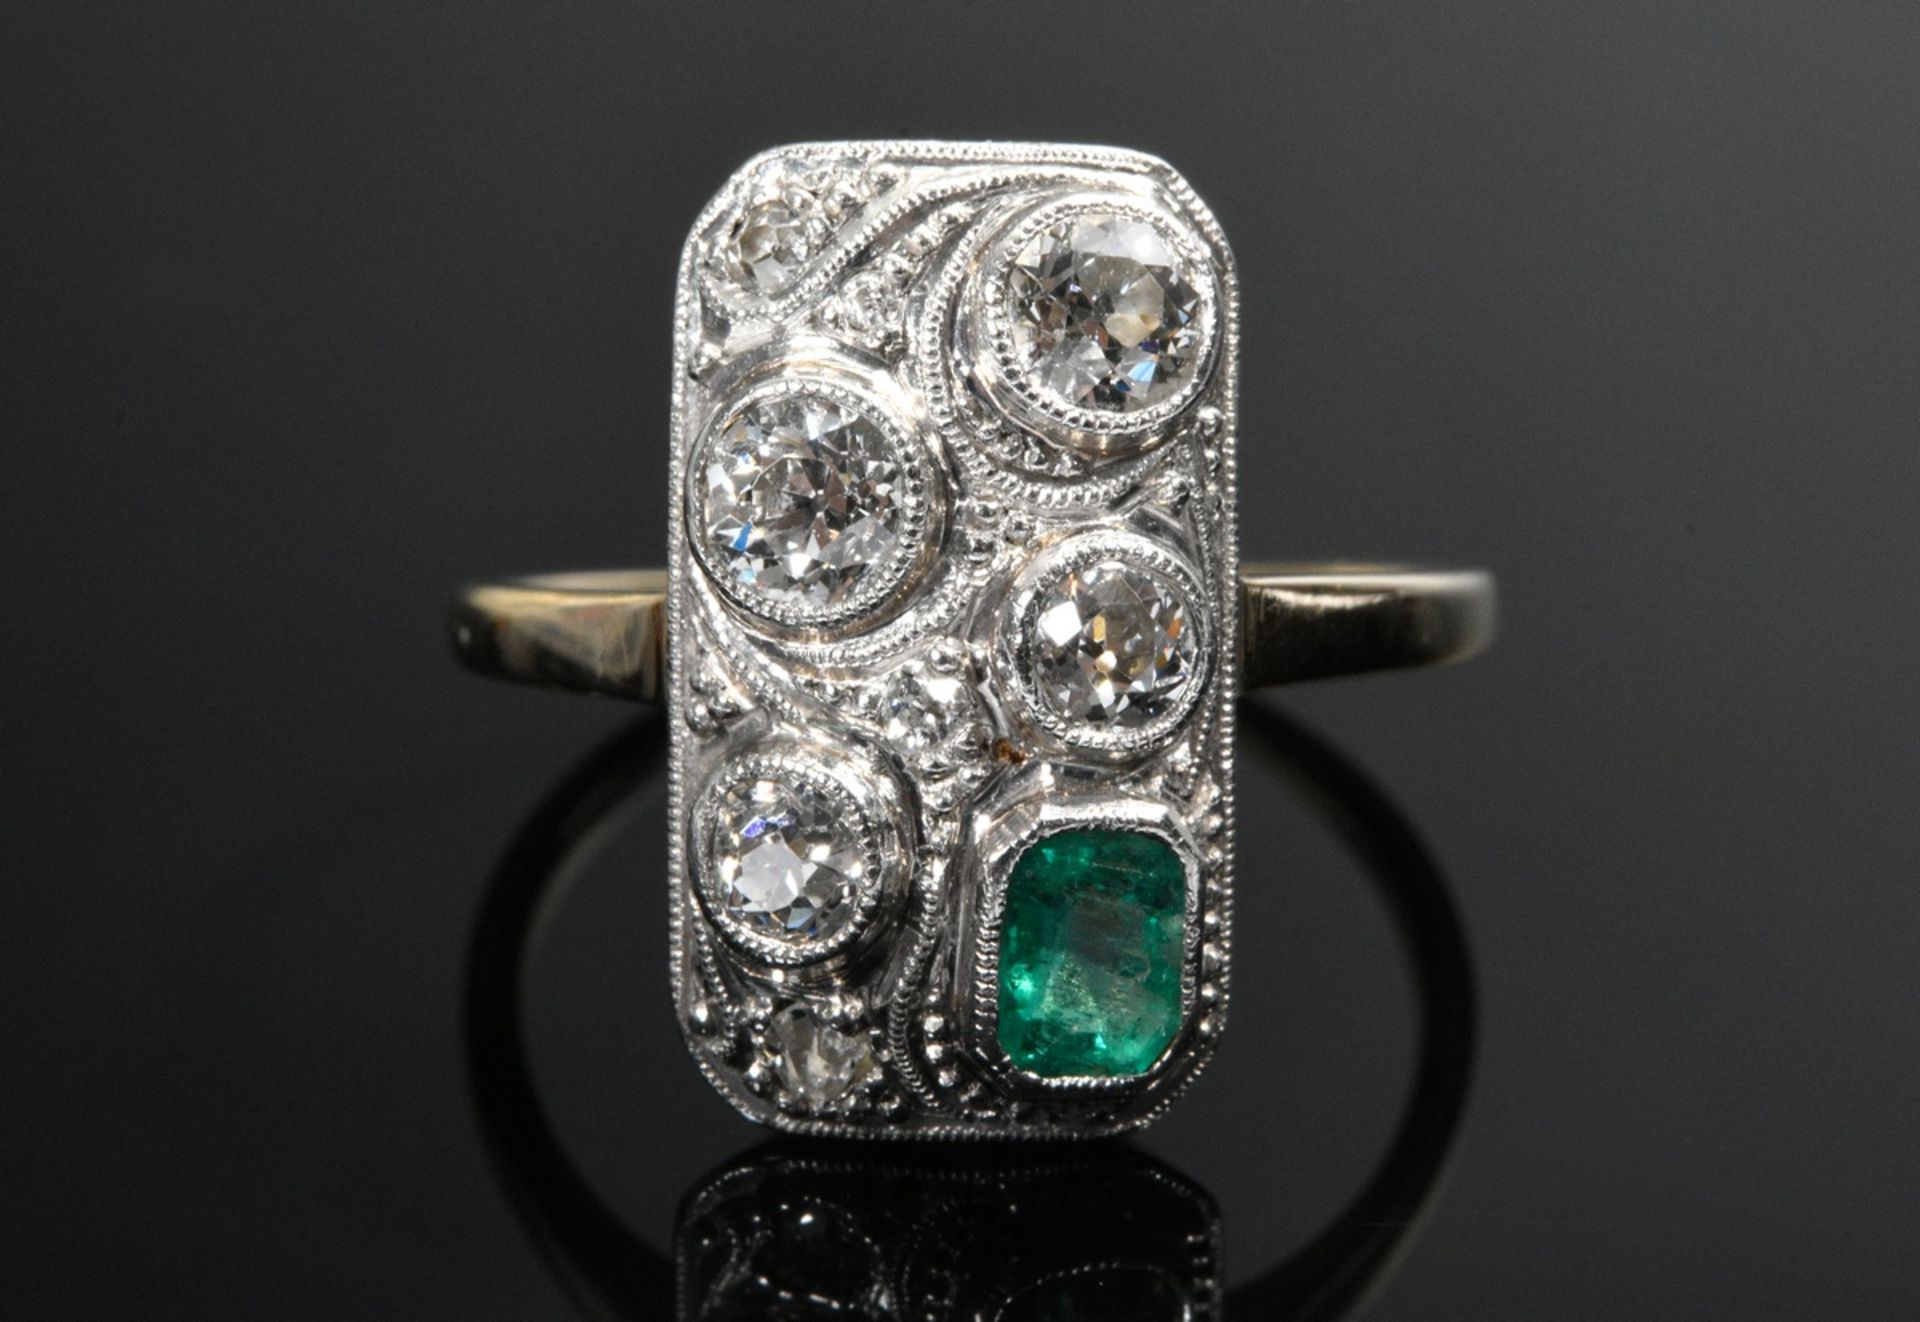 Handcrafted platinum-plated Art Deco yellow gold 585 ring with emerald (approx. 0.25ct) and old-cut - Image 2 of 3